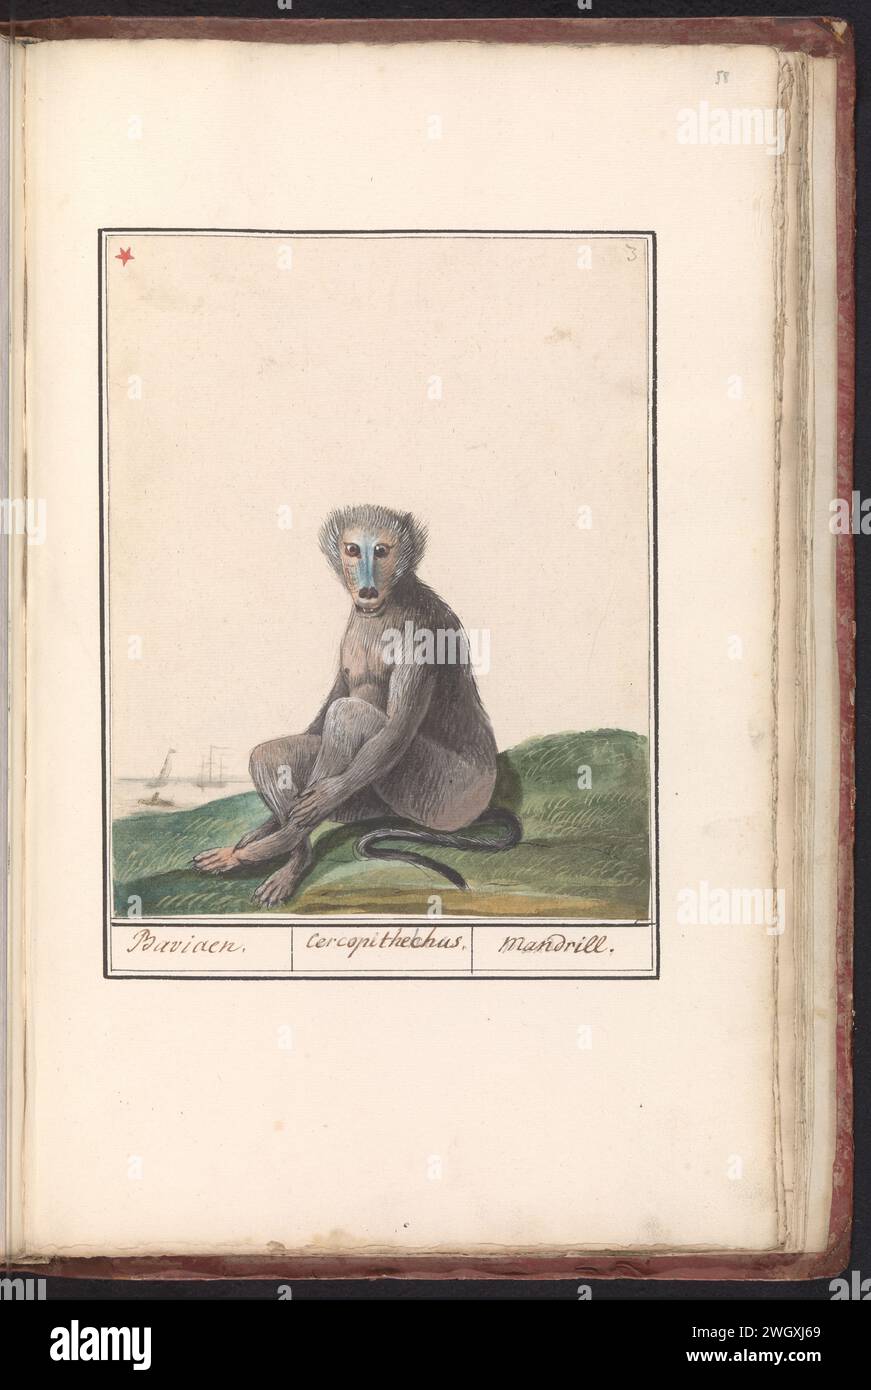 Mandril (Mandrillus sphinx), anonymous, 1790 - 1814 drawing Mandil. Numbered at the top right: 3. At the top left marked with a red asterisk. Part of the second album with drawings of four -legged friends. Second of twelve albums with drawings of animals, birds and plants known around 1600, made commissioned by Emperor Rudolf II. With explanation in Dutch, Latin and French. Southern Netherlands paper. watercolor (paint). deck paint. ink. pencil brush / pen monkeys, apes: mandril Stock Photo